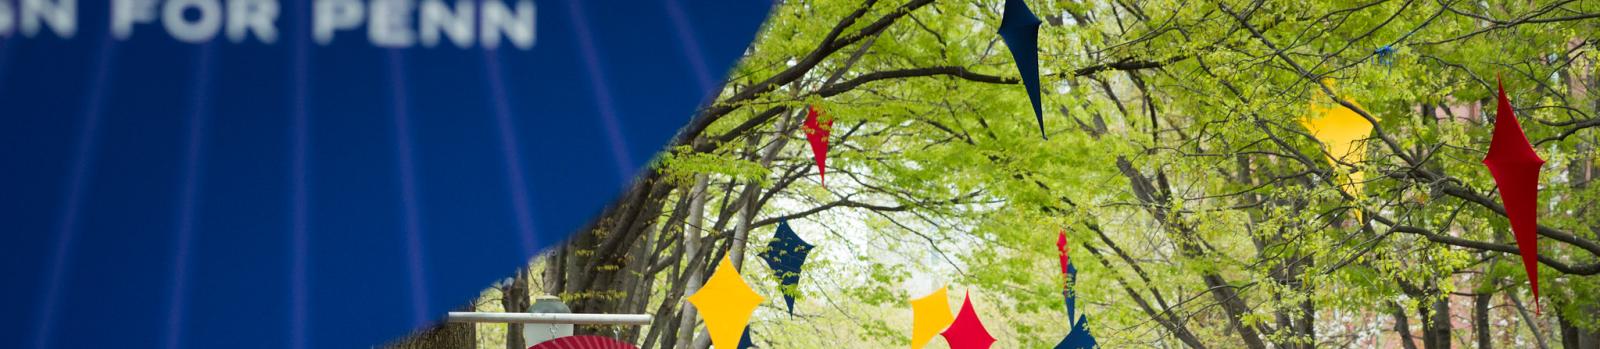 Trees on Penn's campus decorated with Kites